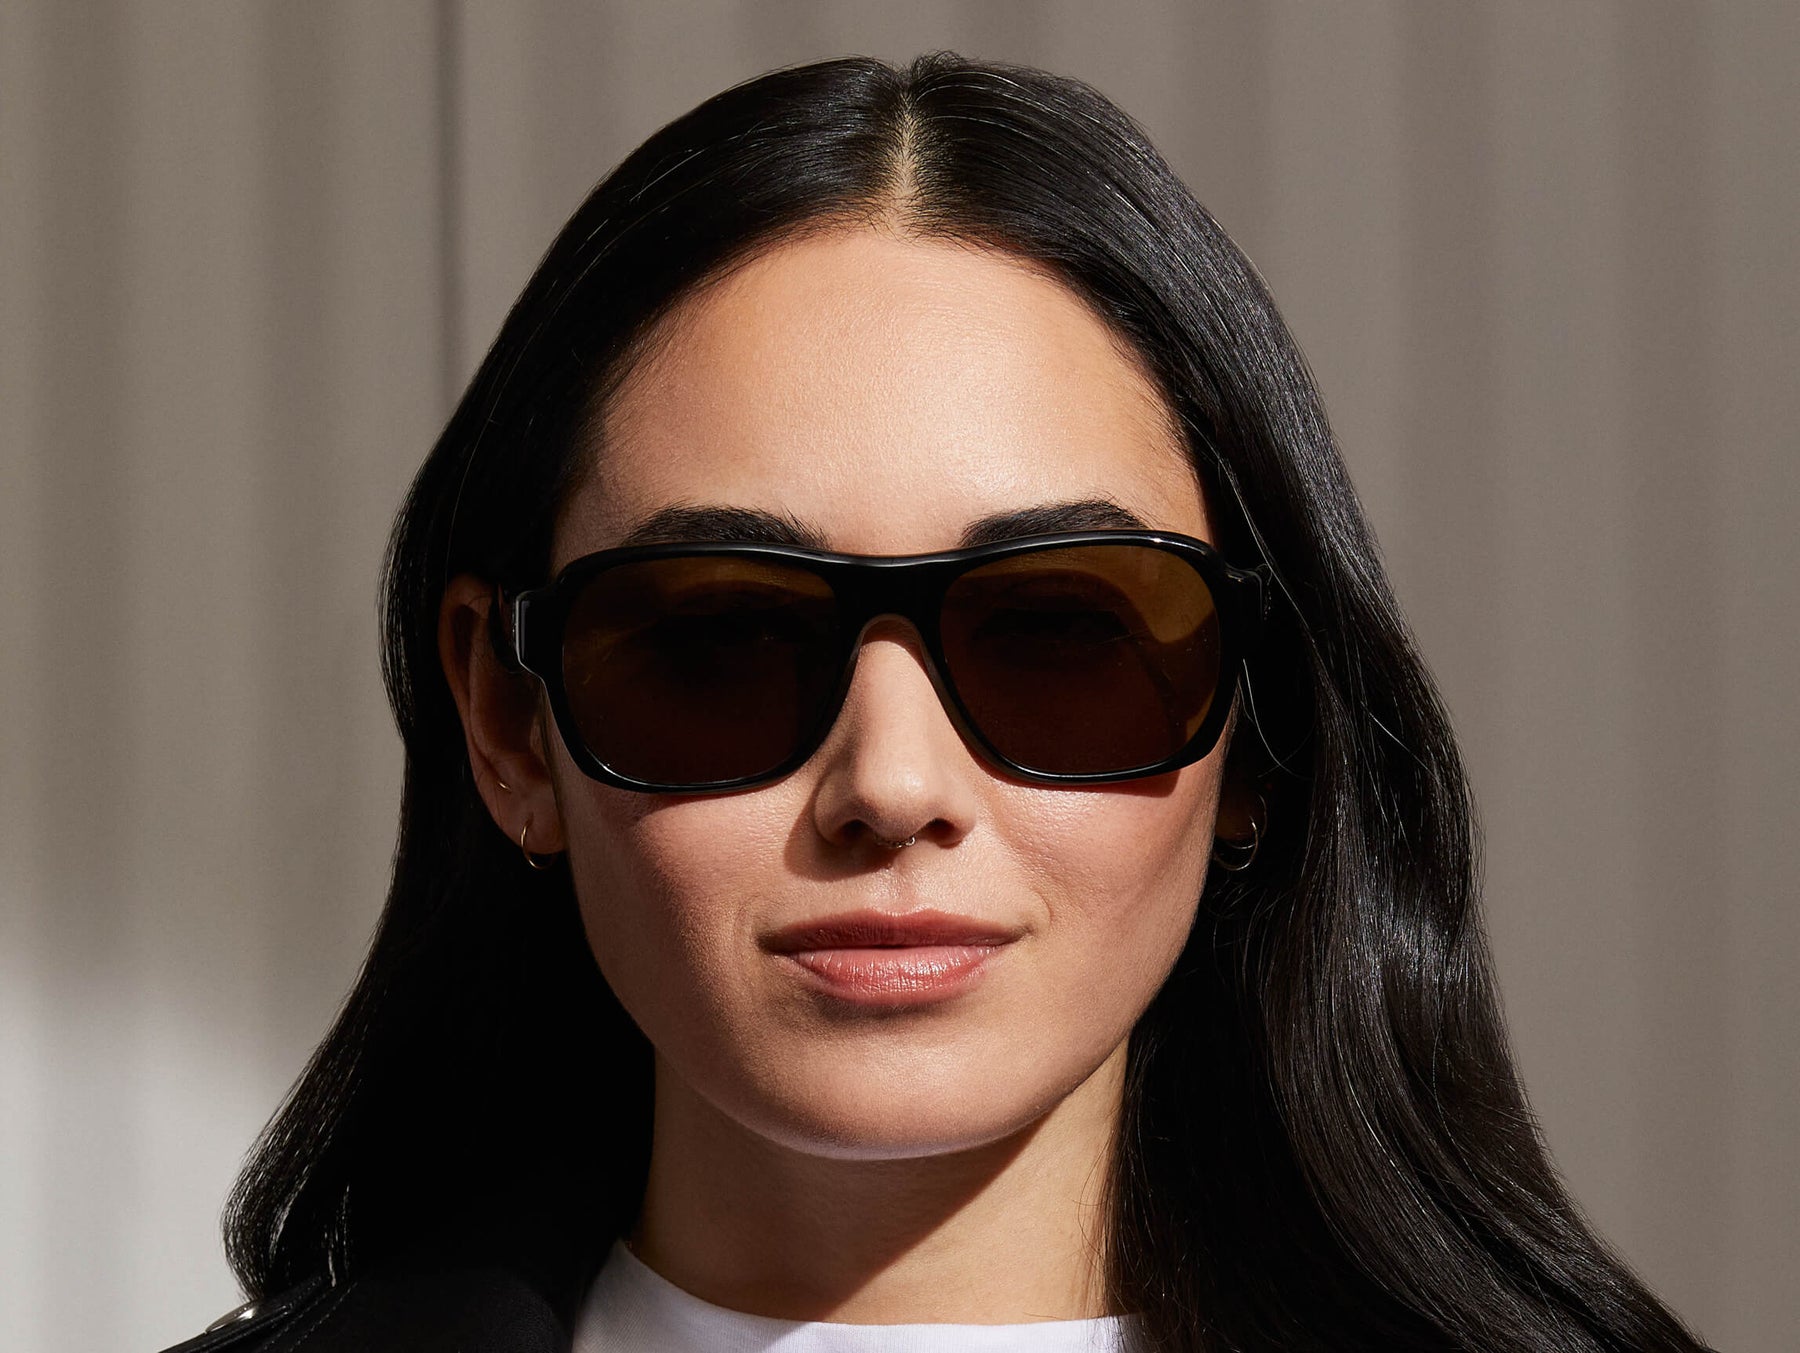 Model is wearing The SHVITZ SUN in Black in size 57 with Green Lenses